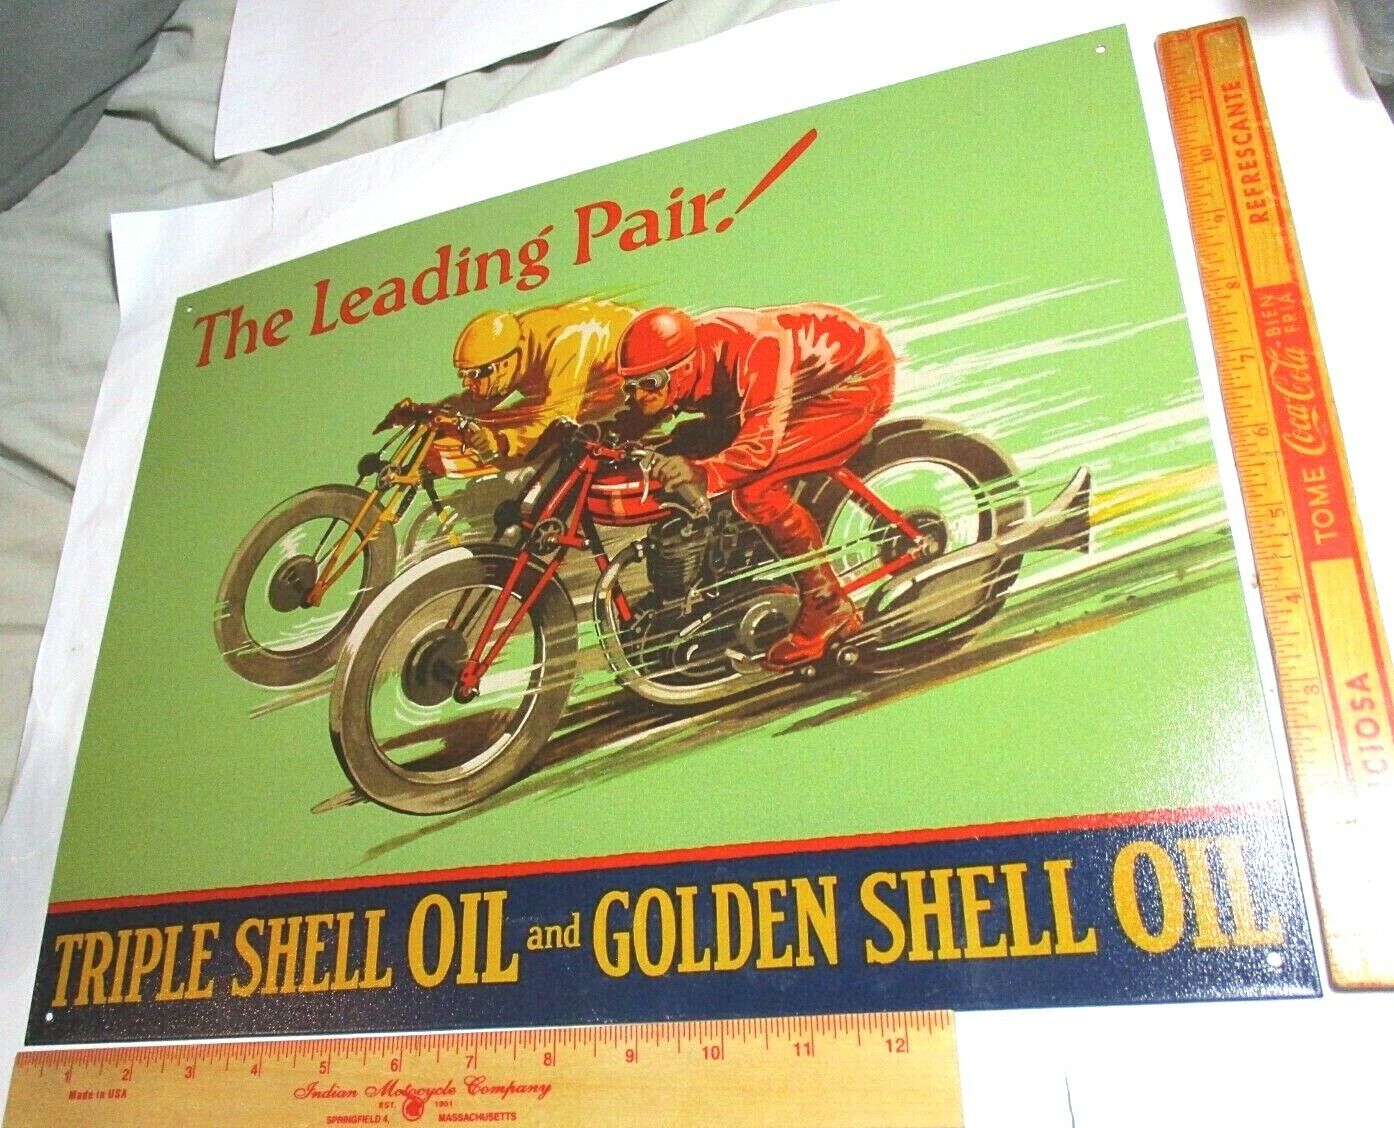 Shell Oil Motorcycle Sign Vintage Race Collectible Old Biker Advertising 16x12.5